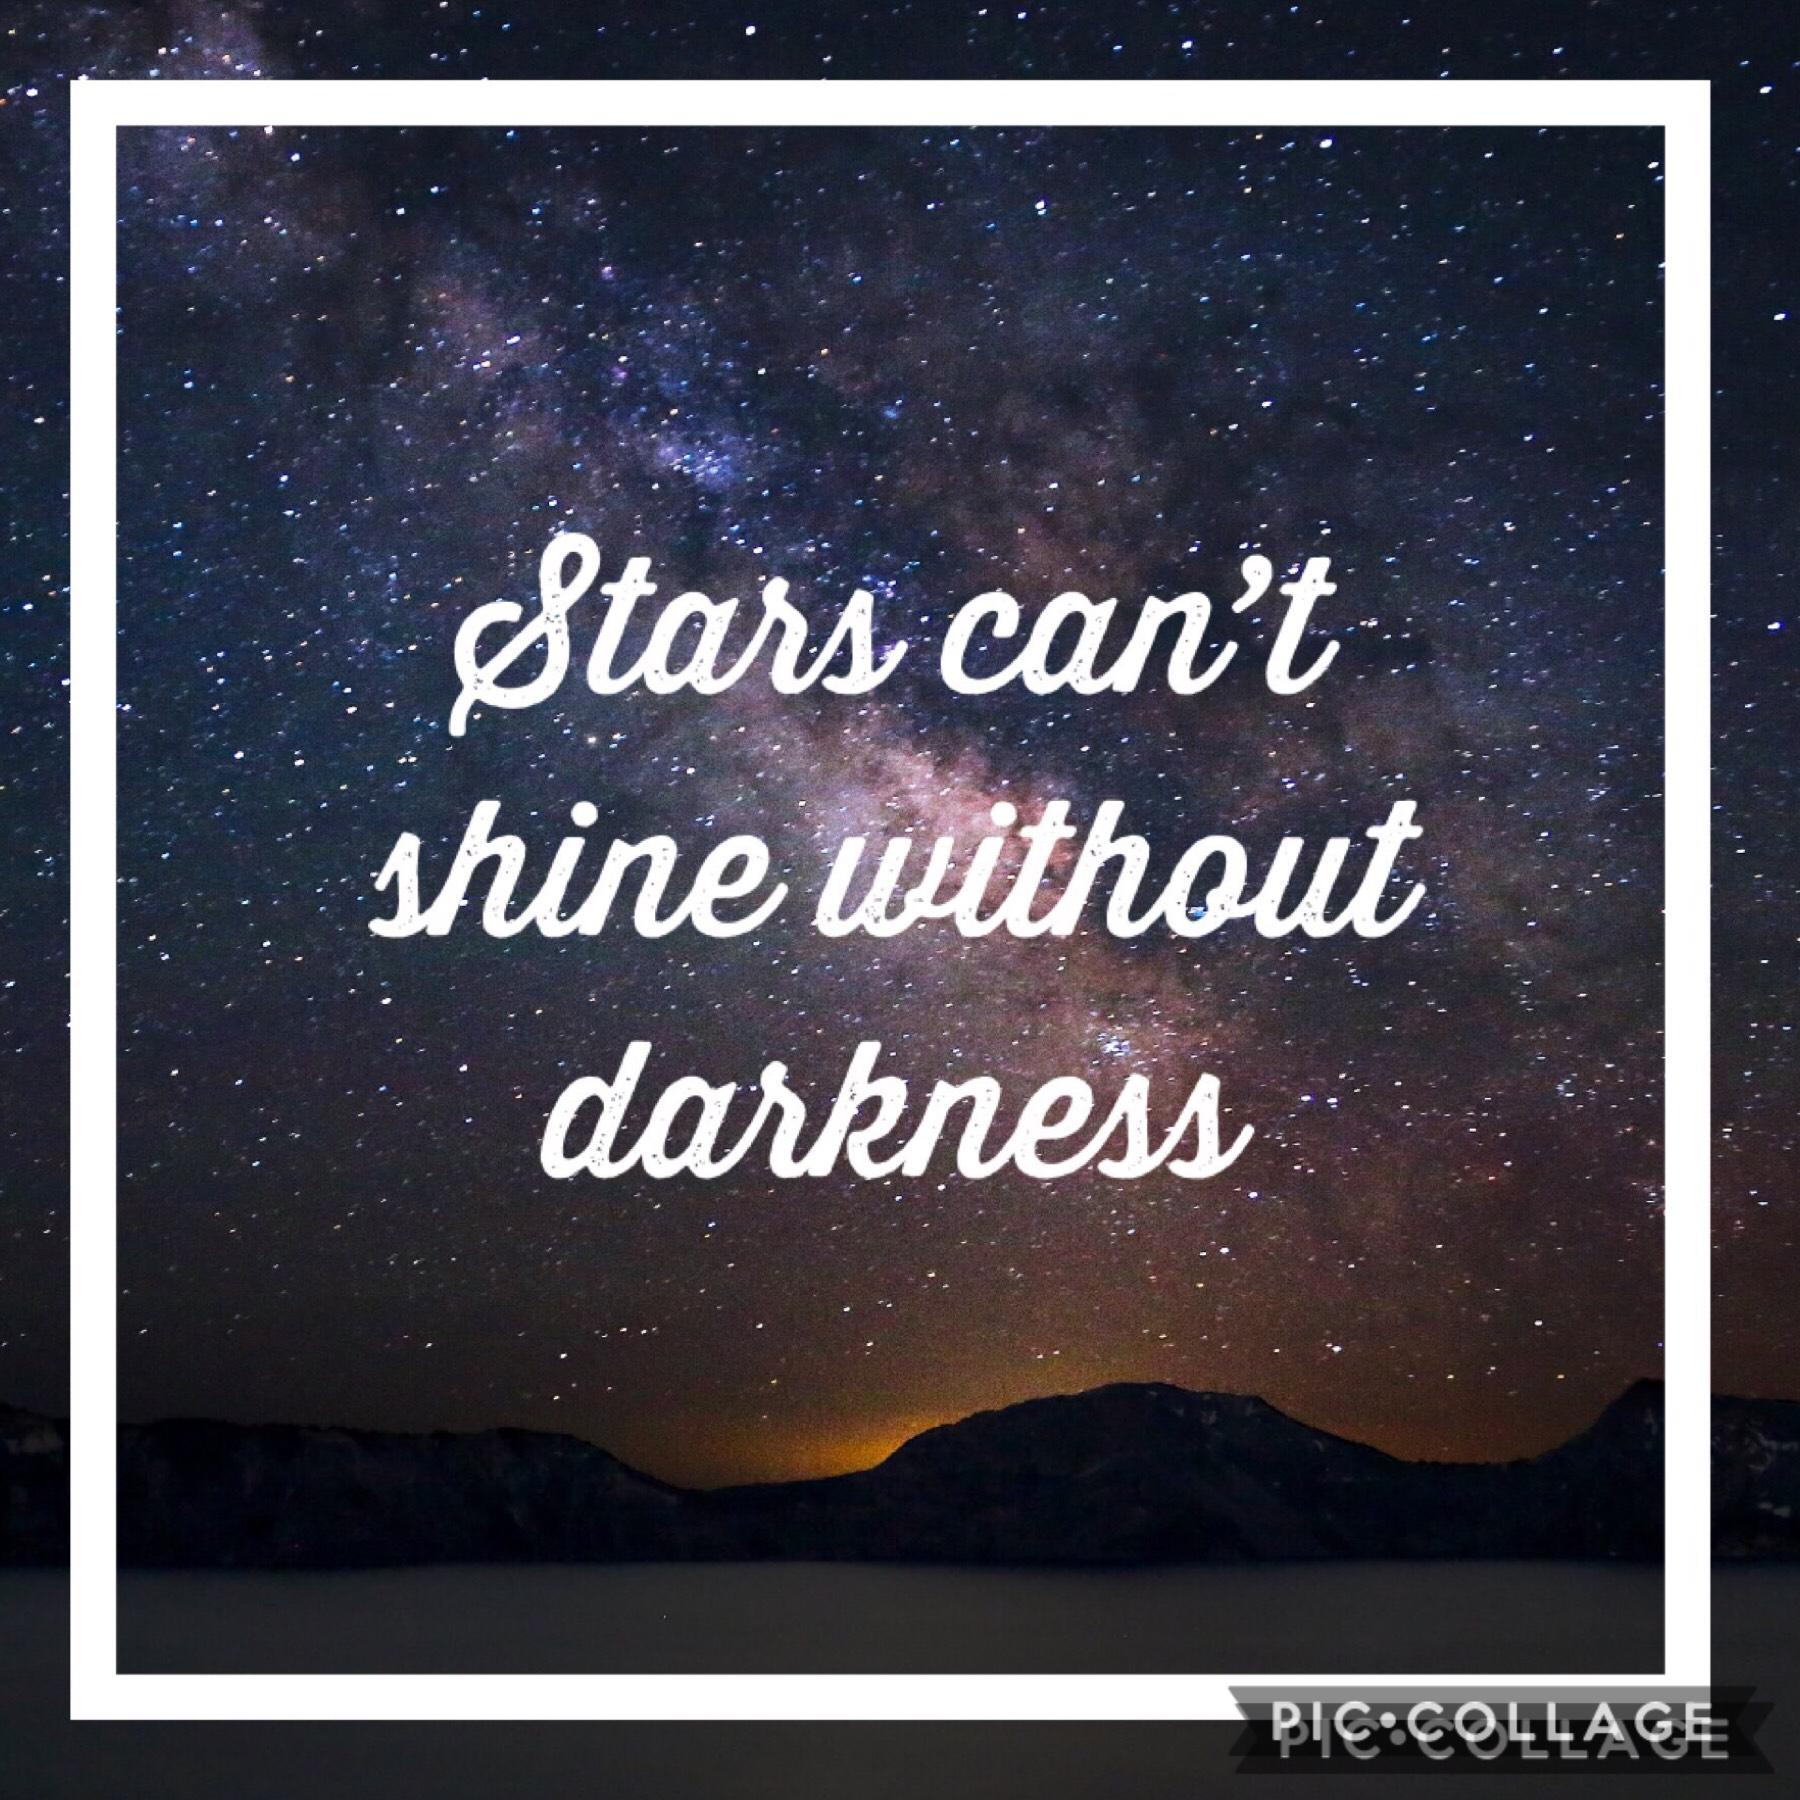 People who lived in the darkness will be the brightest star